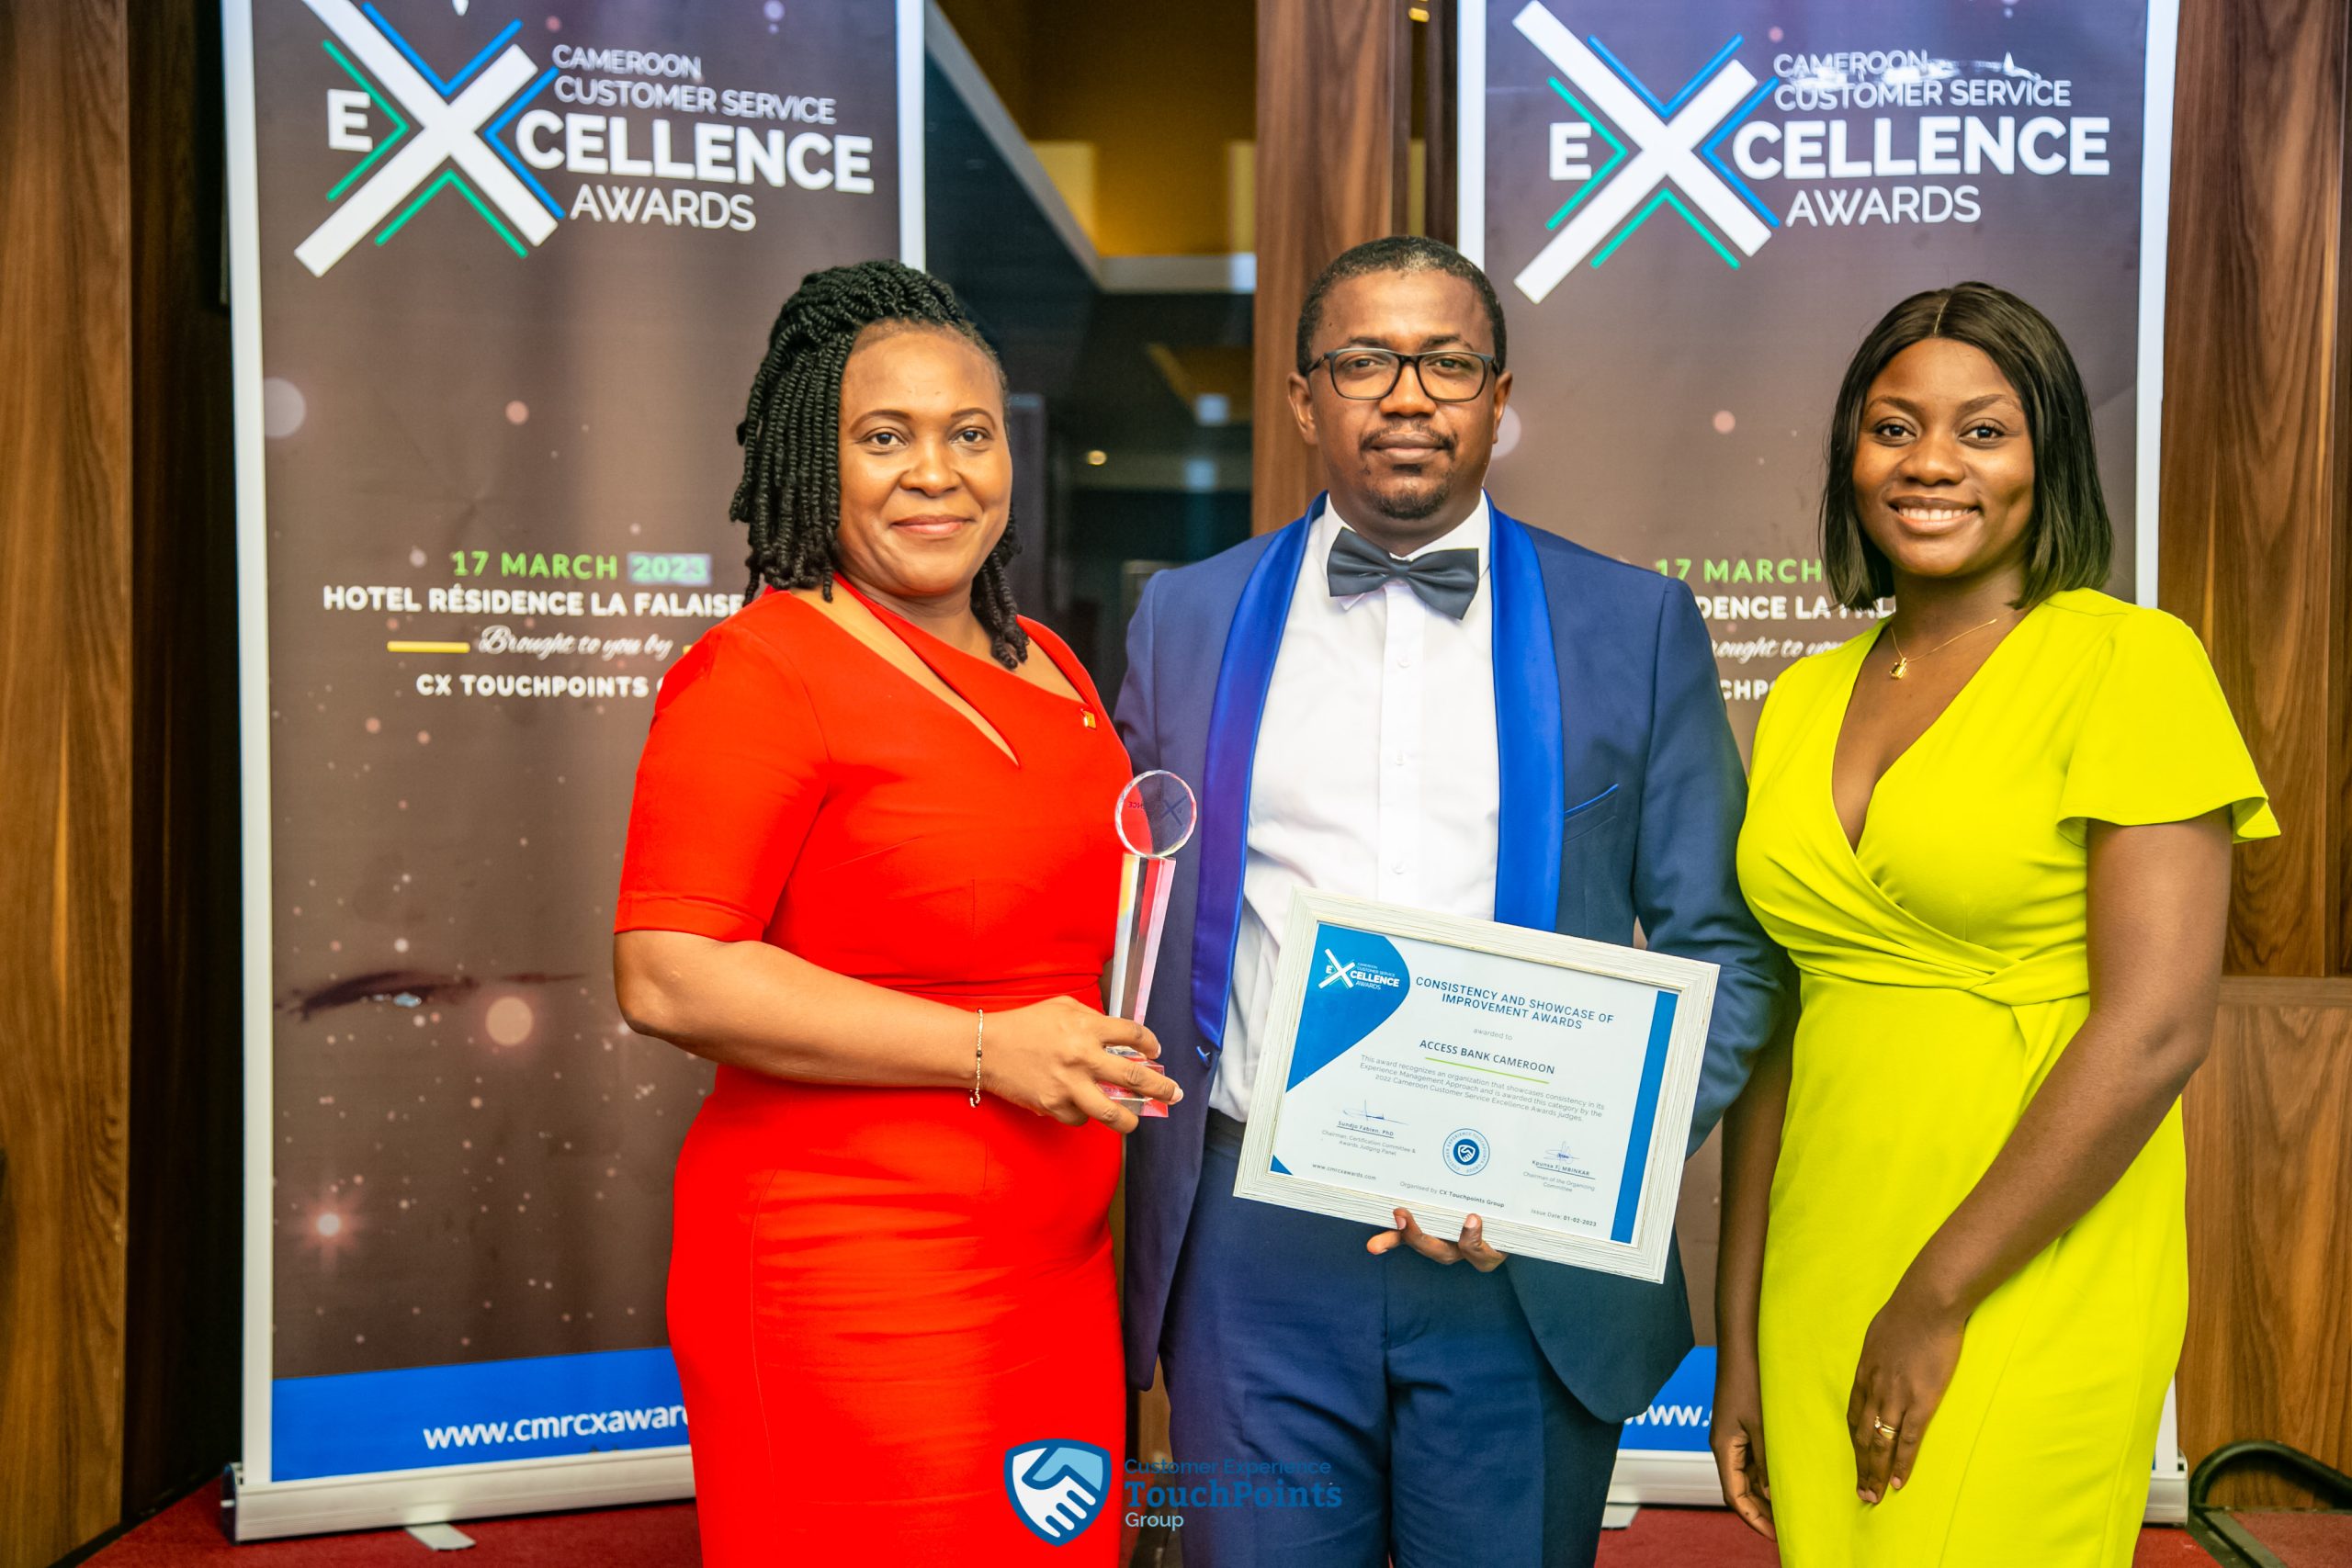 2022 Cameroon Customer Service Excellence awards - Access bank Plc Cameroon